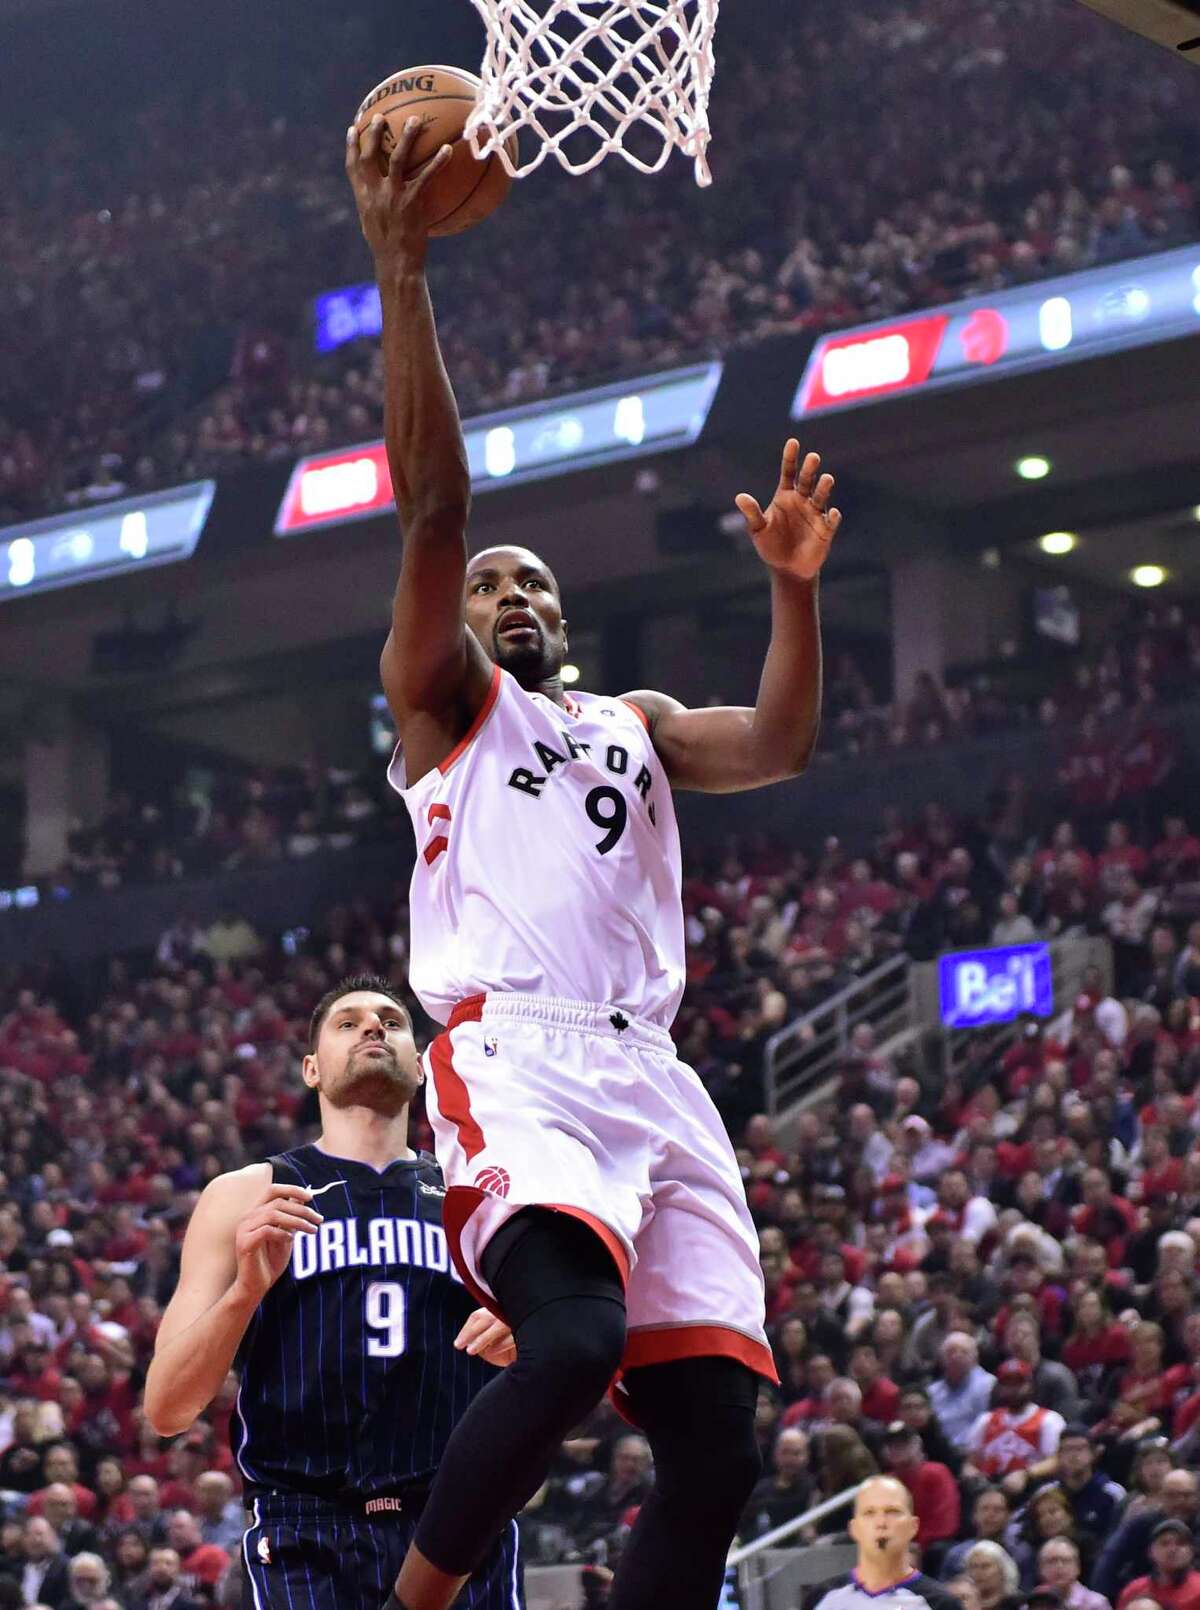 Toronto Raptors' Serge Ibaka scores as Orlando Magic centre Nikola Vucevic (9) watches during the first half of Game 2 of an NBA basketball first-round playoff series Tuesday, April 16, 2019, in Toronto. (Frank Gunn/The Canadian Press via AP)